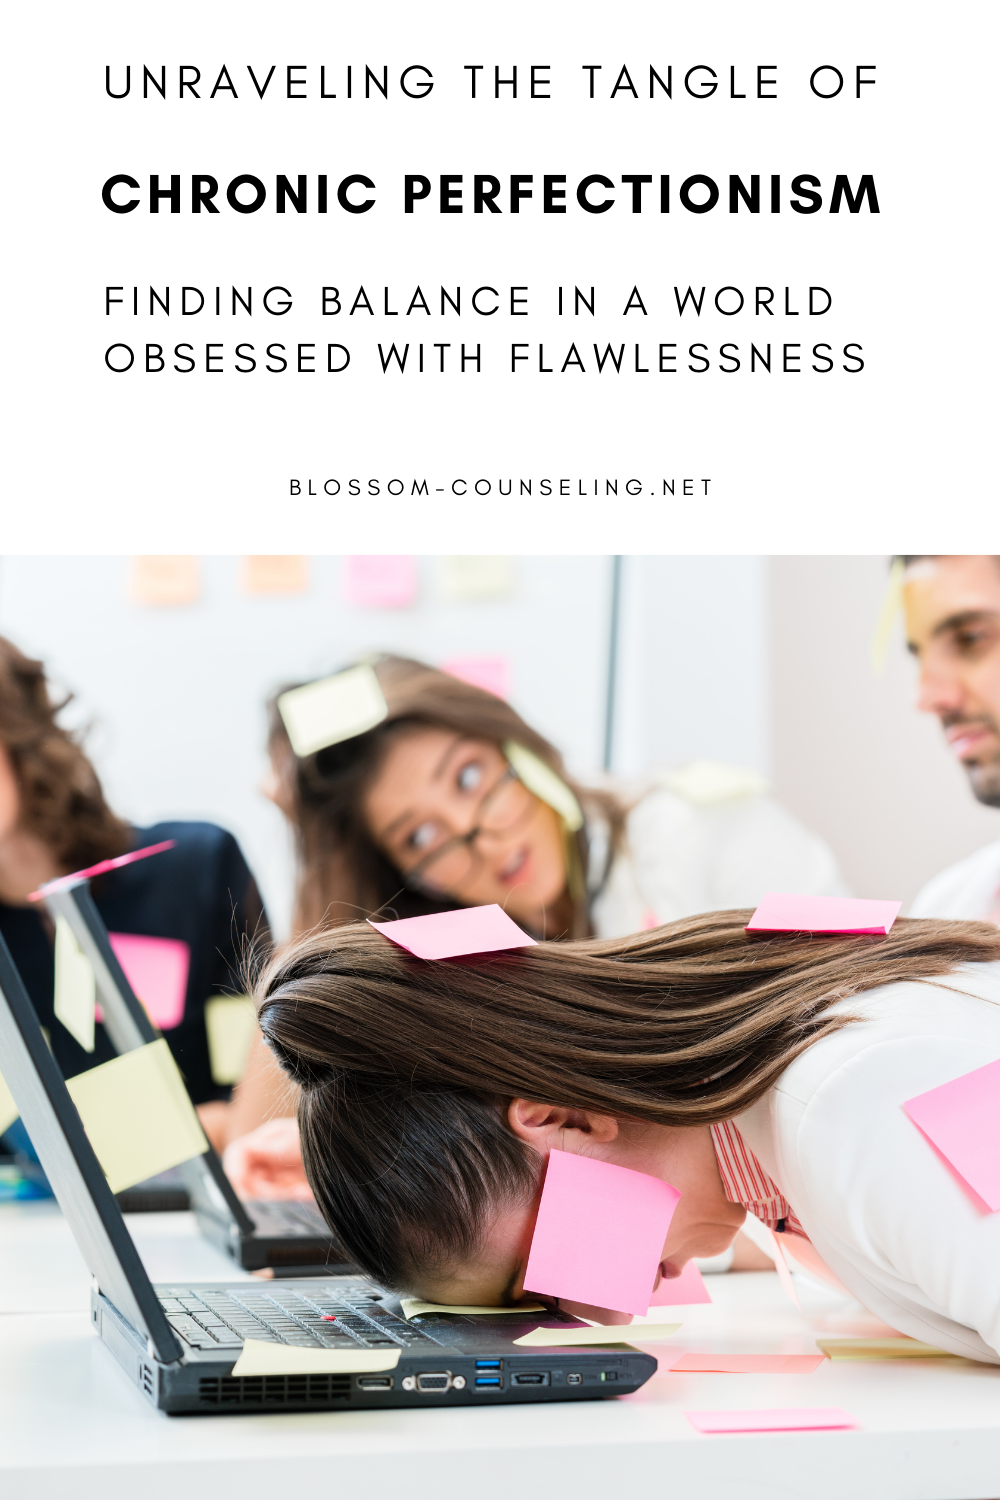 Unraveling the Tangle of Chronic Perfectionism: Finding Balance in a World Obsessed with Flawlessness